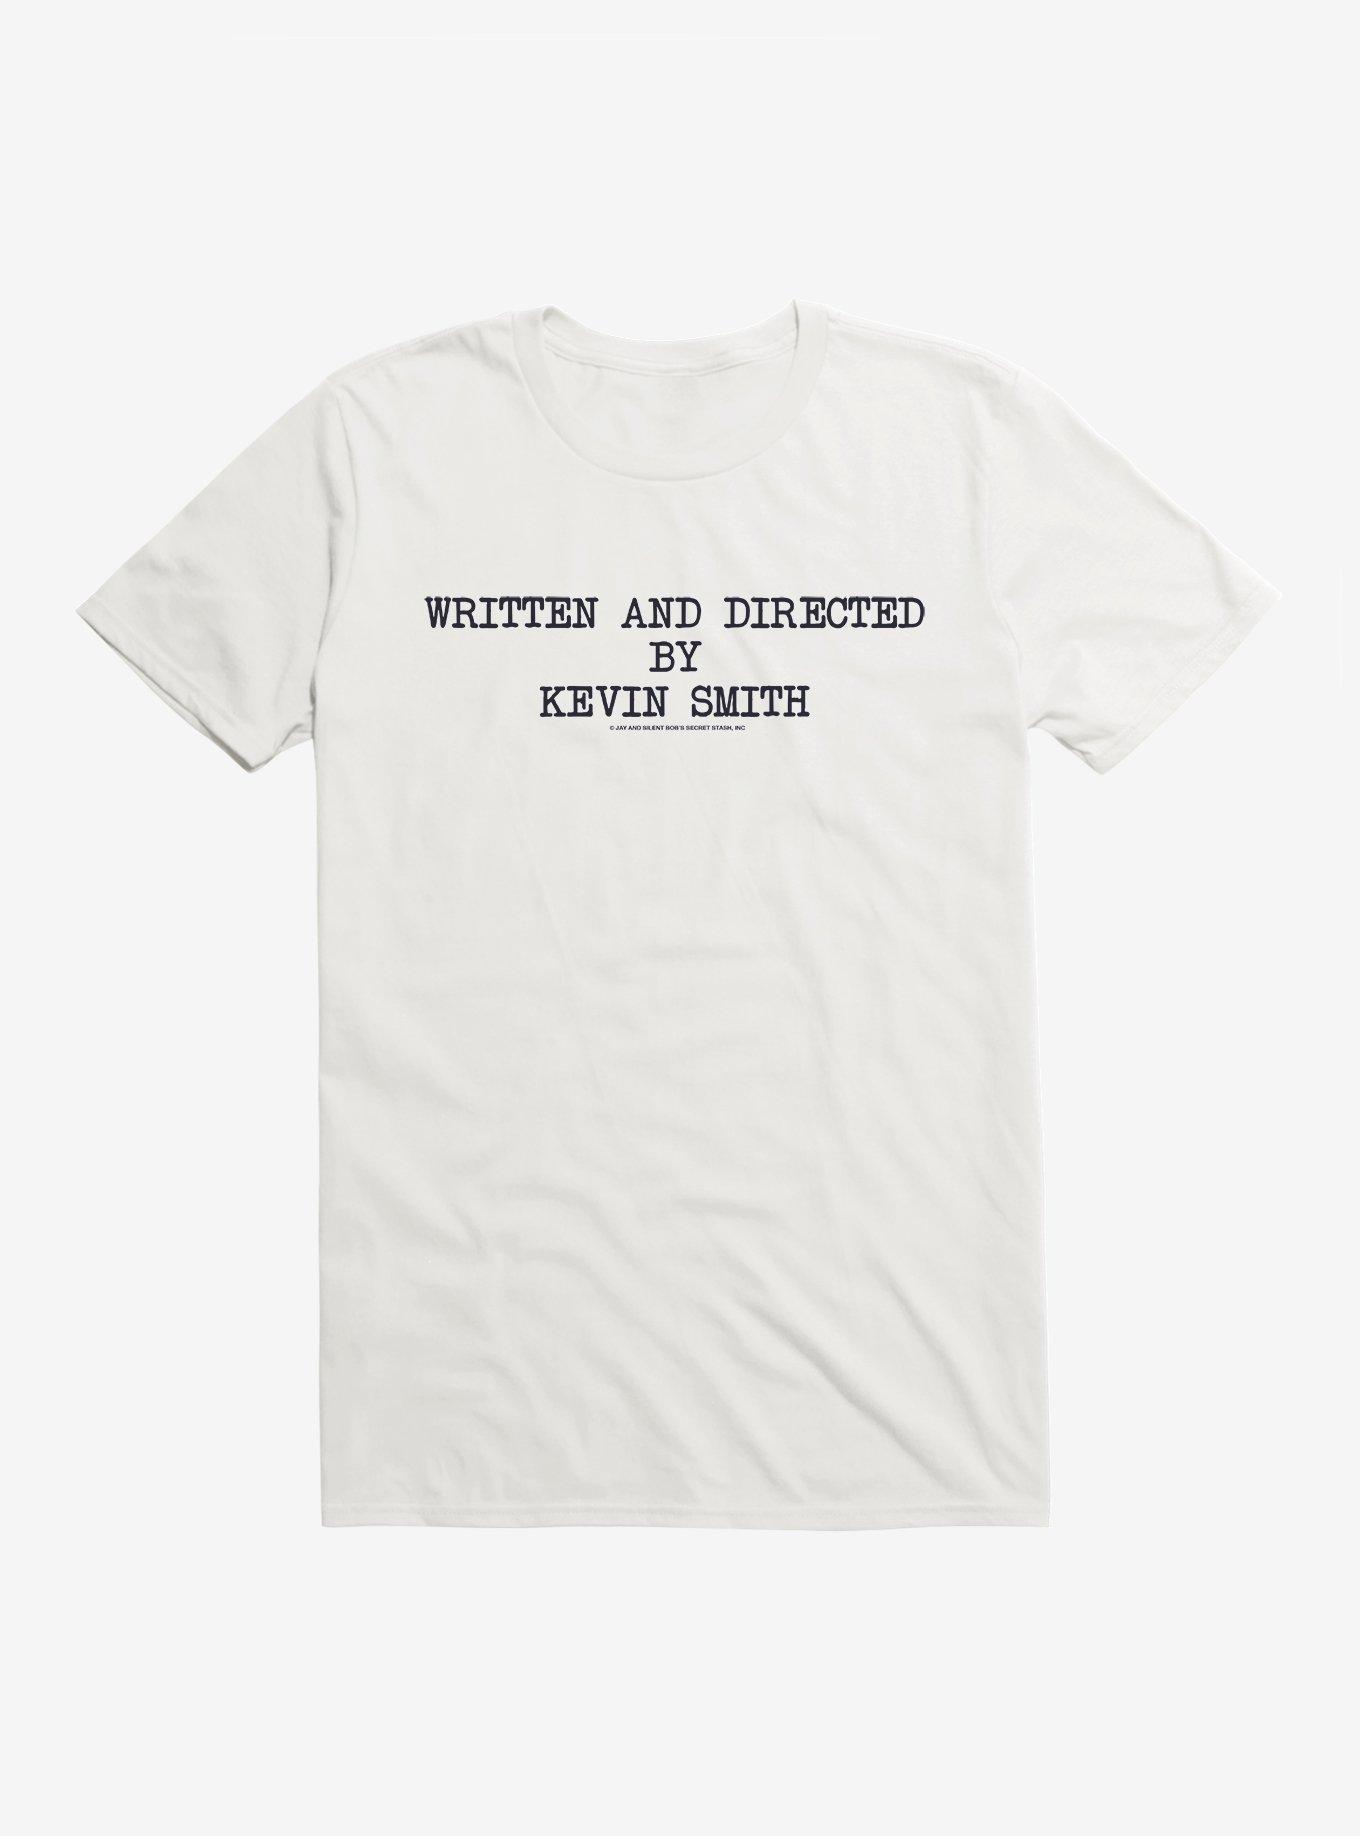 Jay And Silent Bob Written And Directed By Kevin Smith T-Shirt, WHITE, hi-res